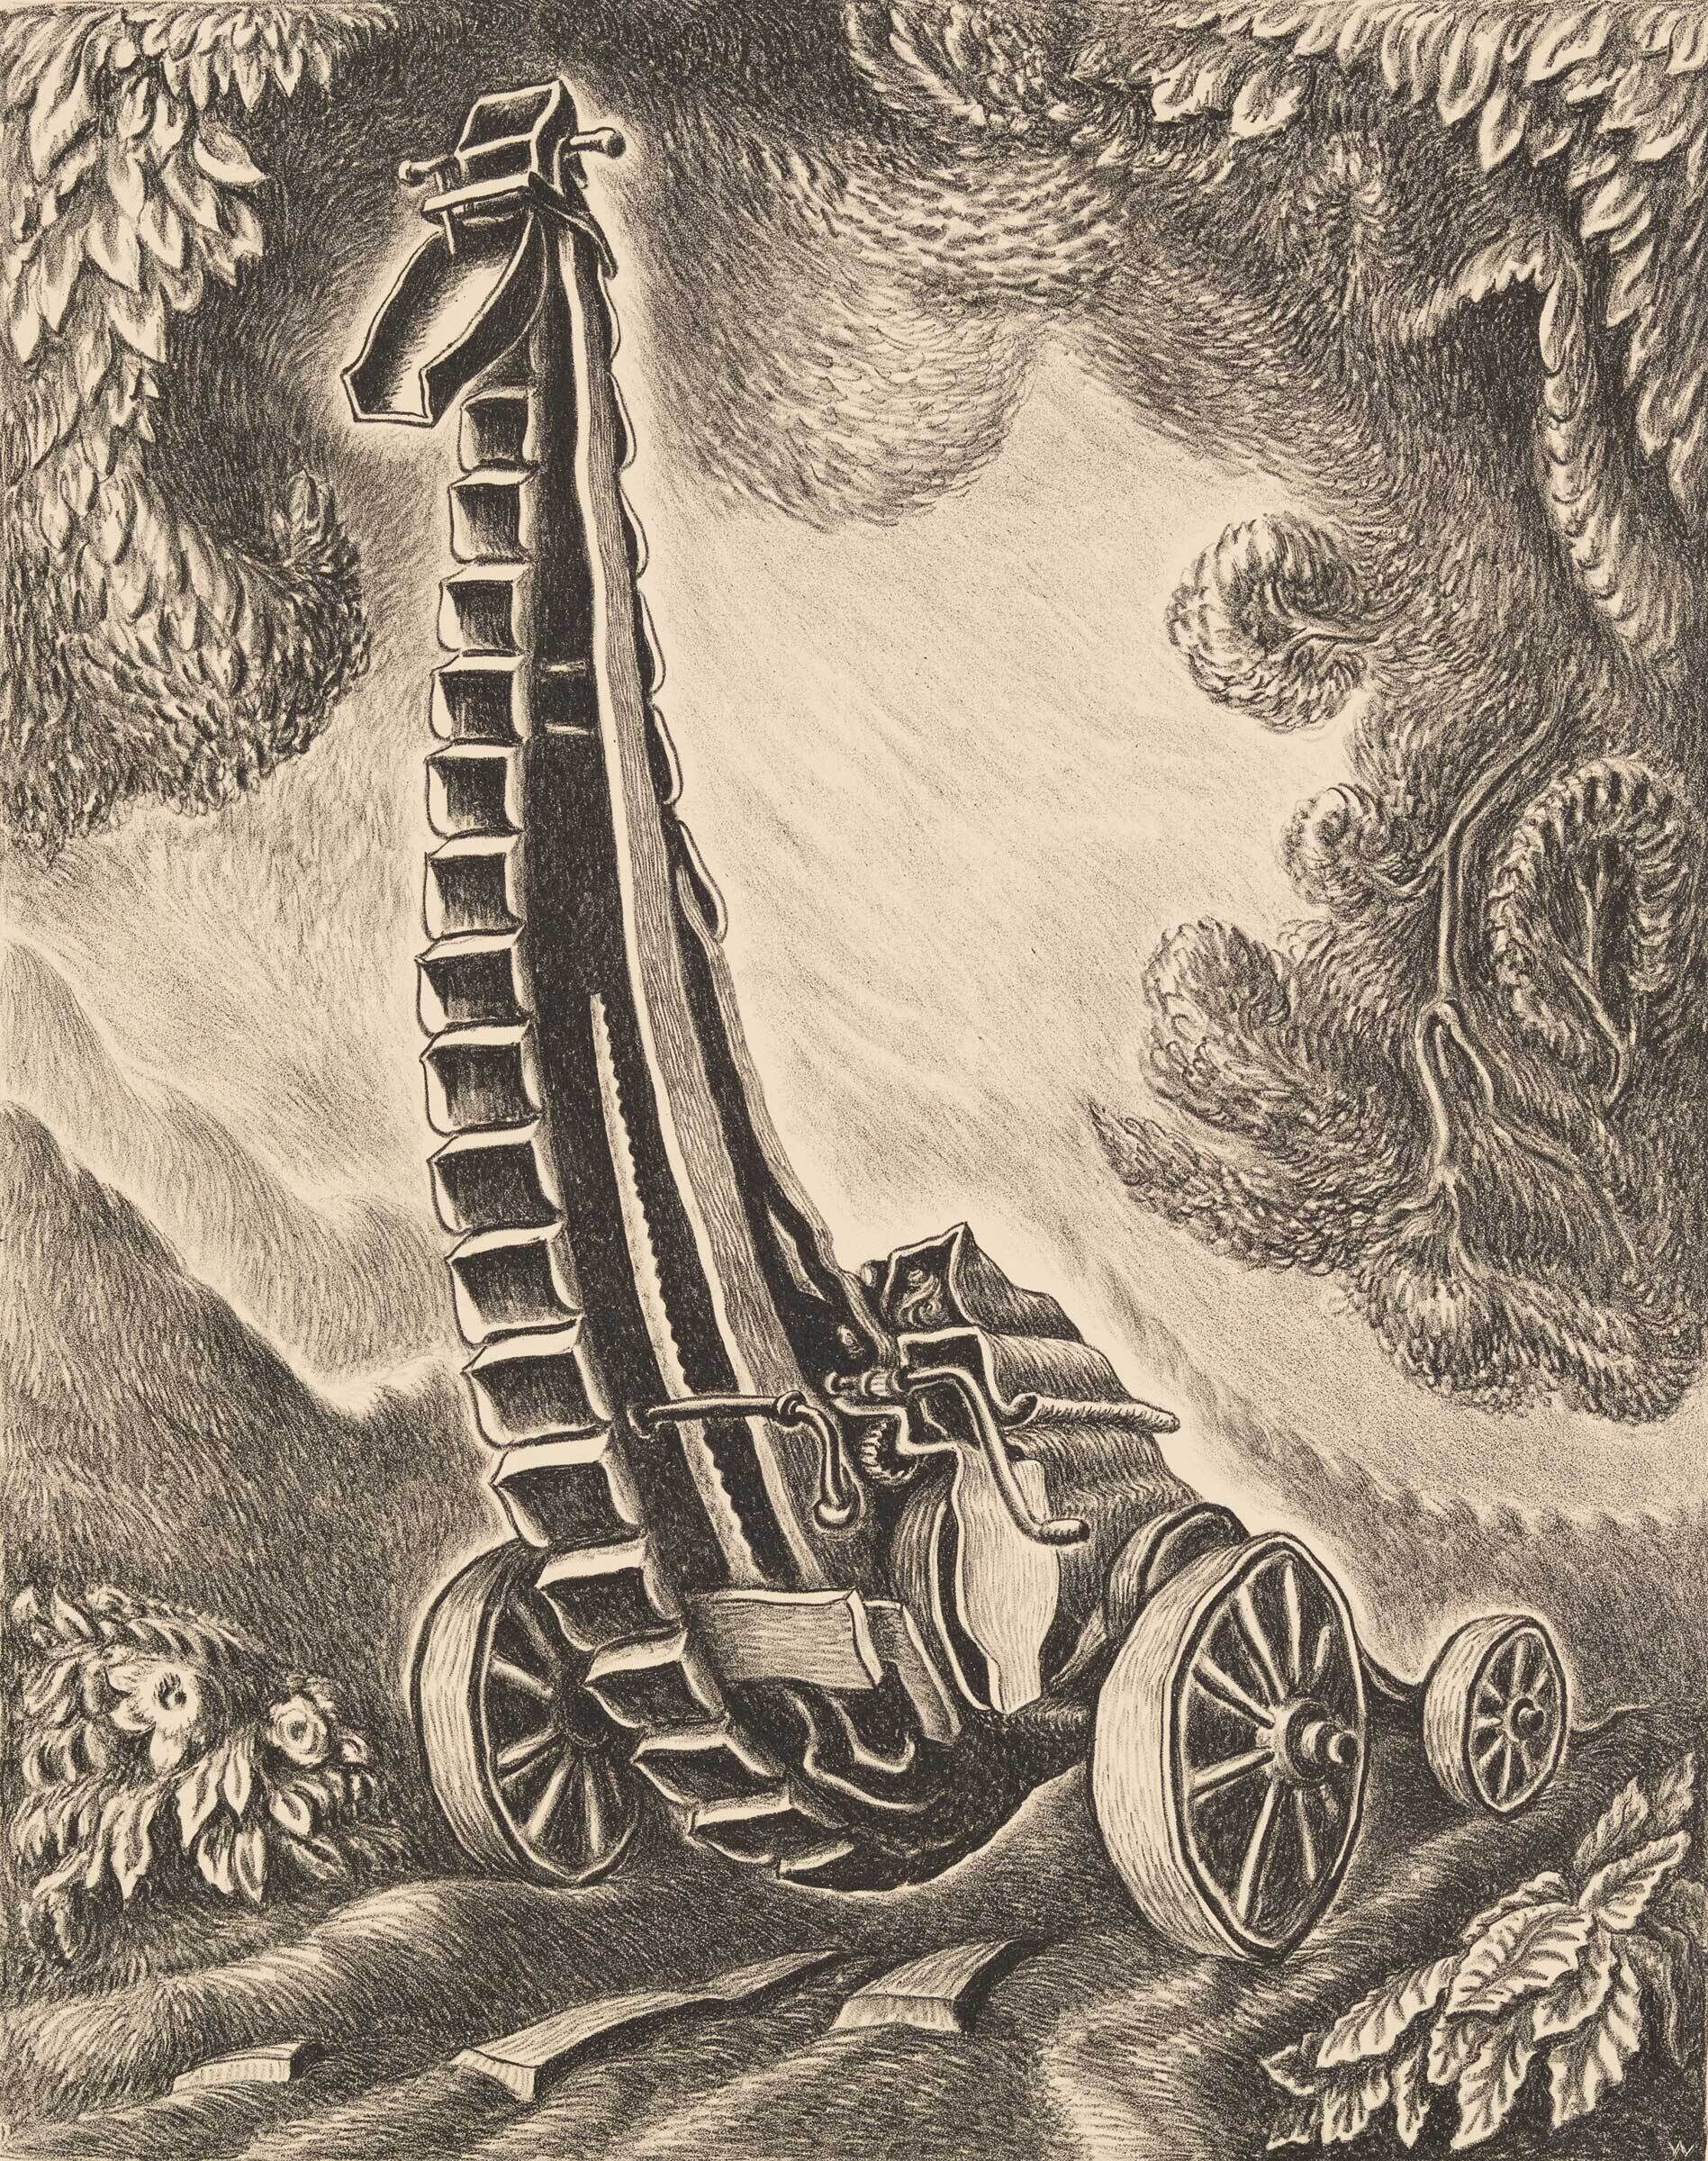 Etching of a surreal, ladder-like structure with a cannon at the base, surrounded by foliage and abstract patterns.